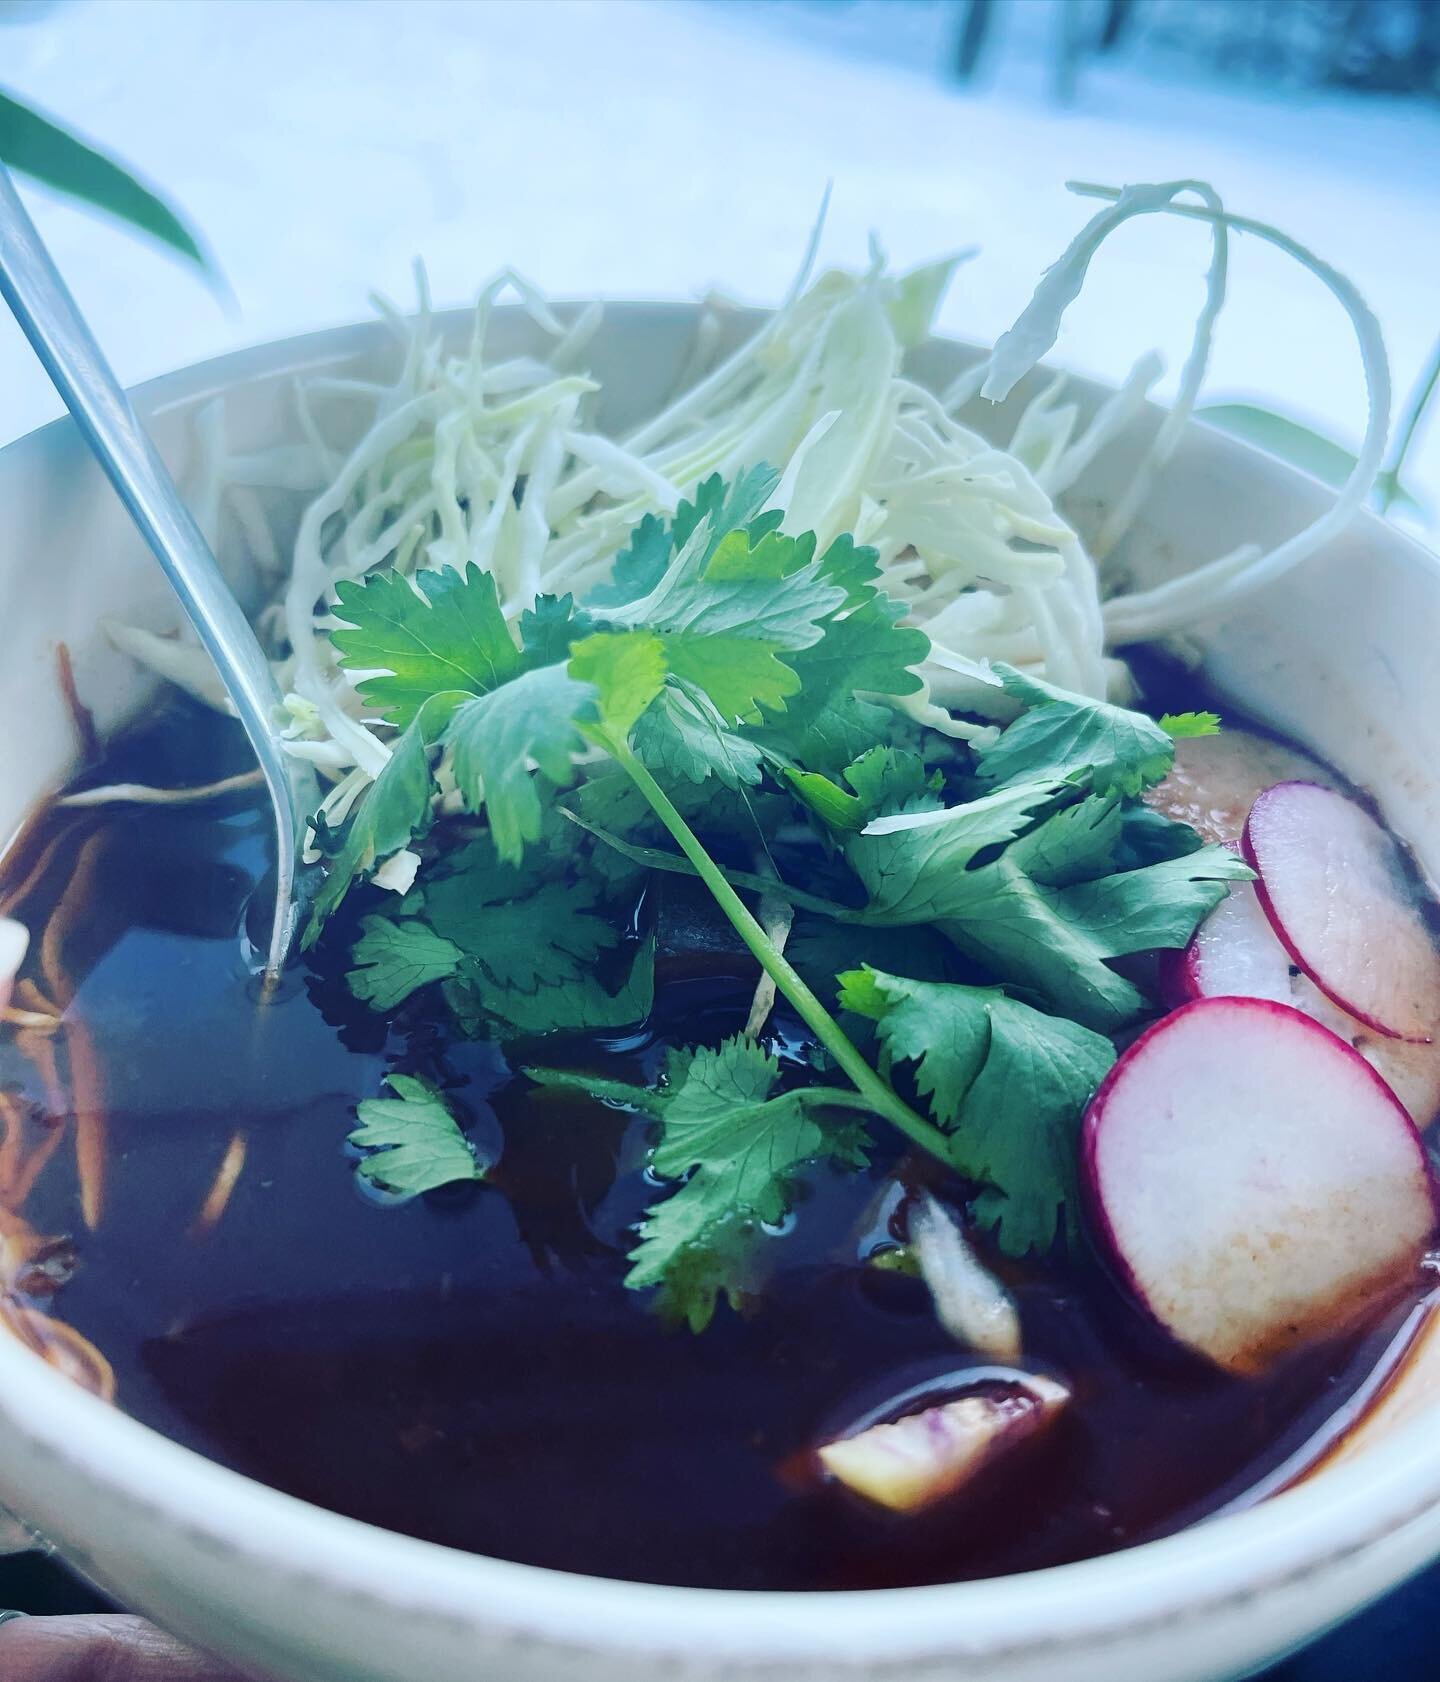 🍲Spicy Pozole Rojo is our soup of the week. Mushrooms, hominy, zucchini, tomato and garlic all simmer in a spicy pepper broth. Topped with shredded cabbage, cilantro and rasdish. Reve up and warm your metabolism!